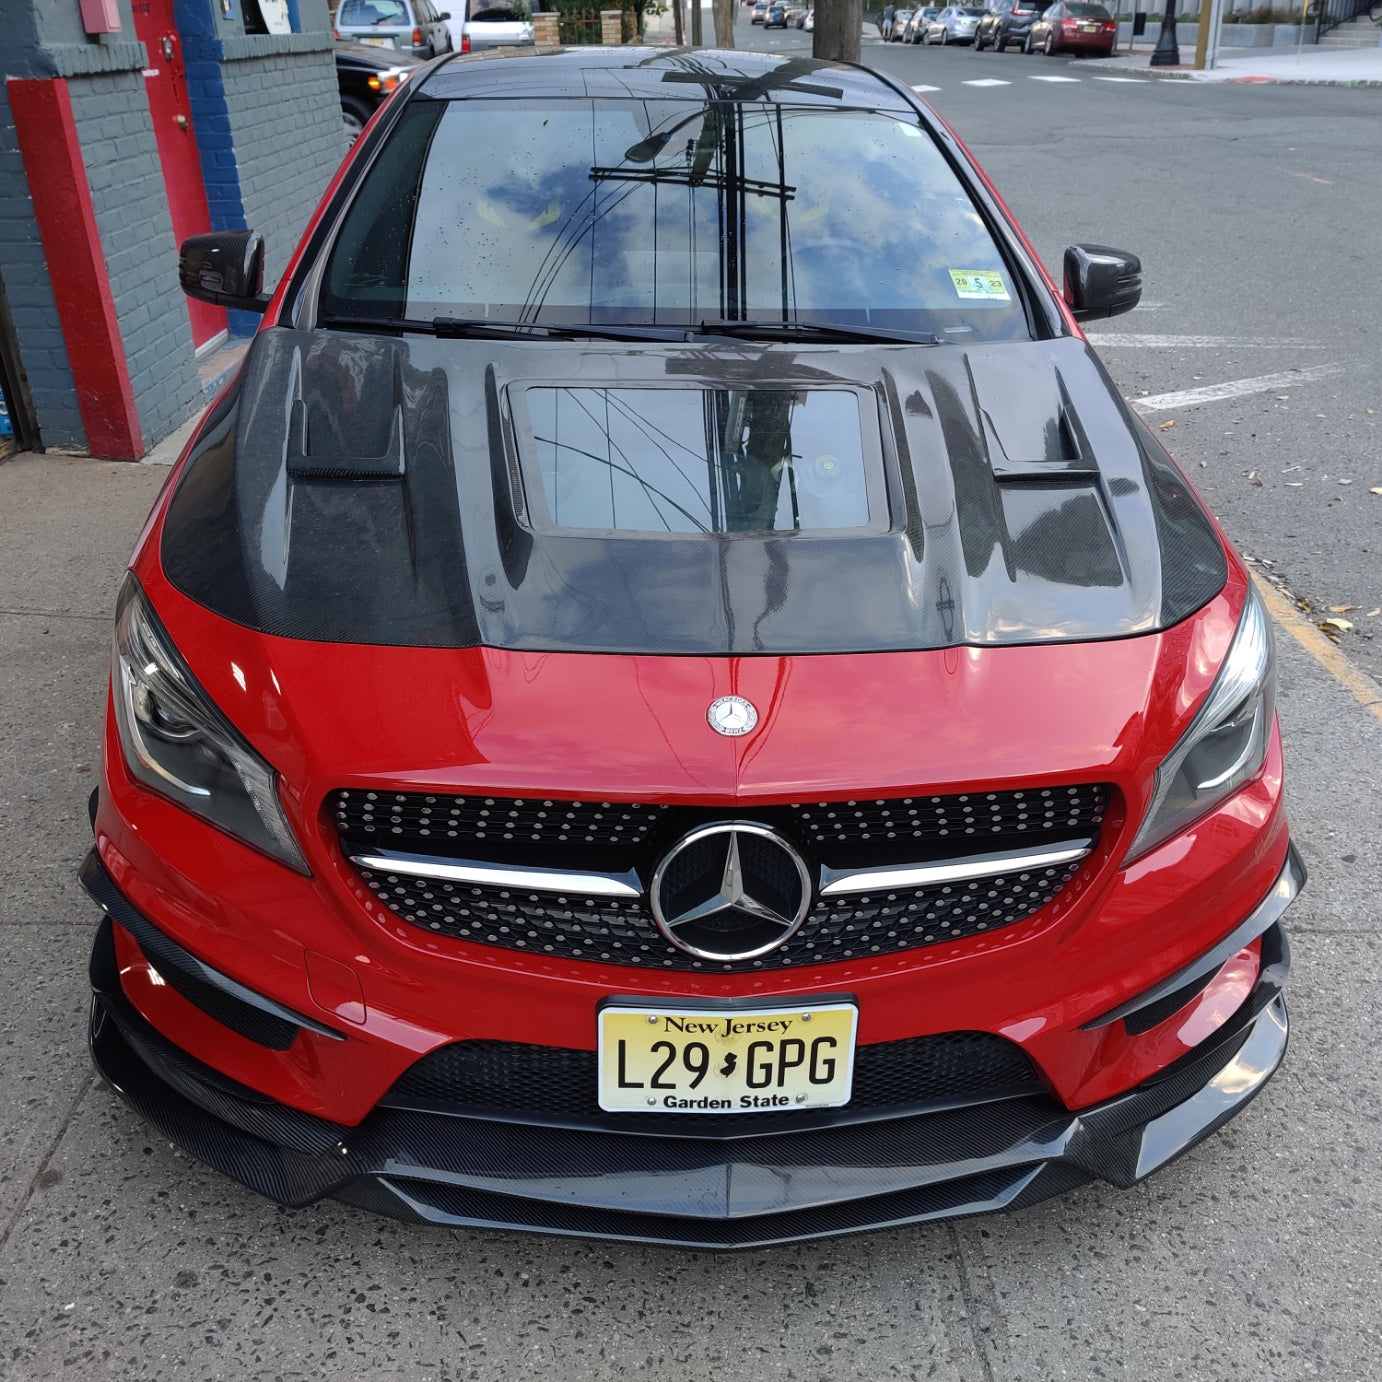 Aero Republic Tempered Glass Hood Bonnet Clearview for Mercedes benz C117 2014-2019 CLA250 CLA45 AMG-7